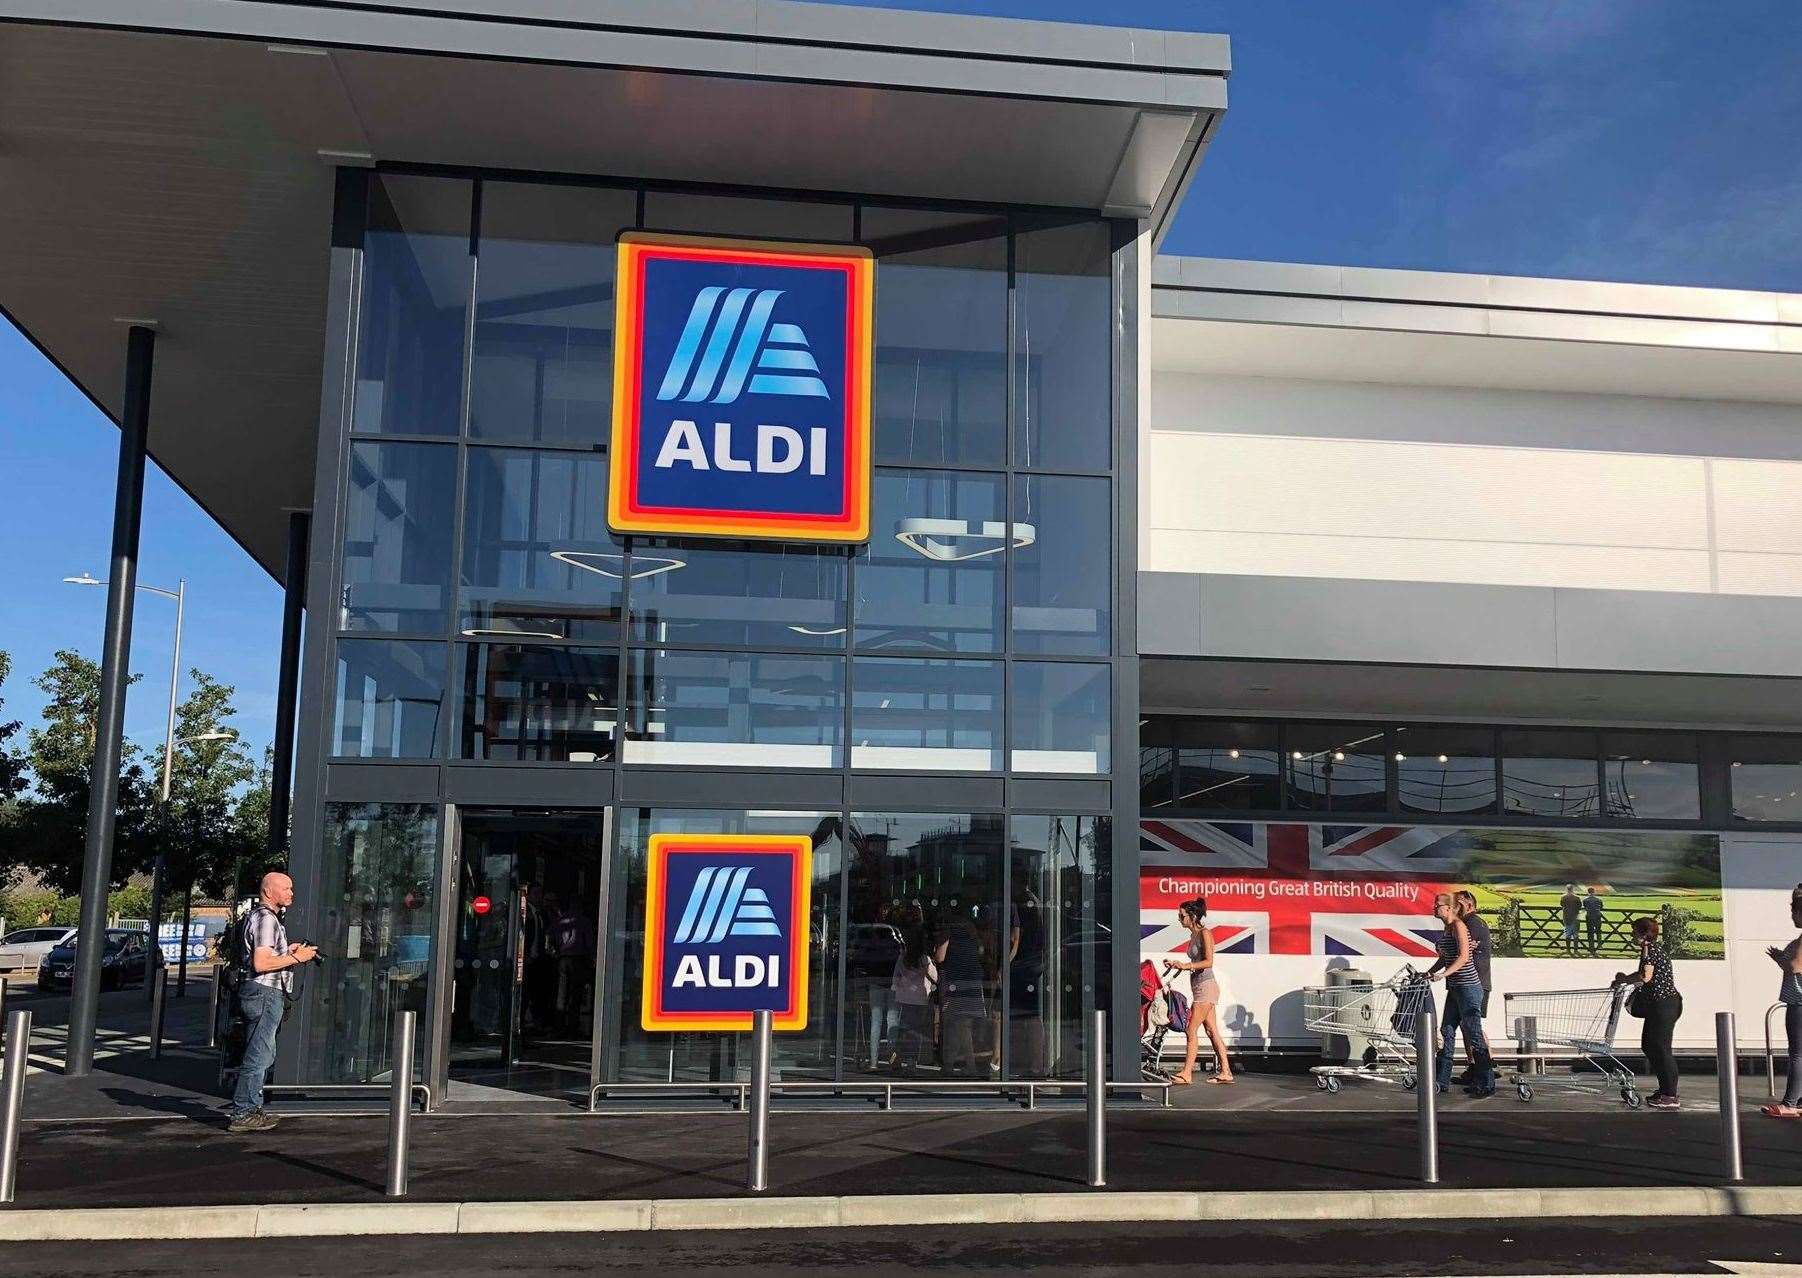 Aldi opened in Victoria Road in August 2018, featuring a 93-space car park